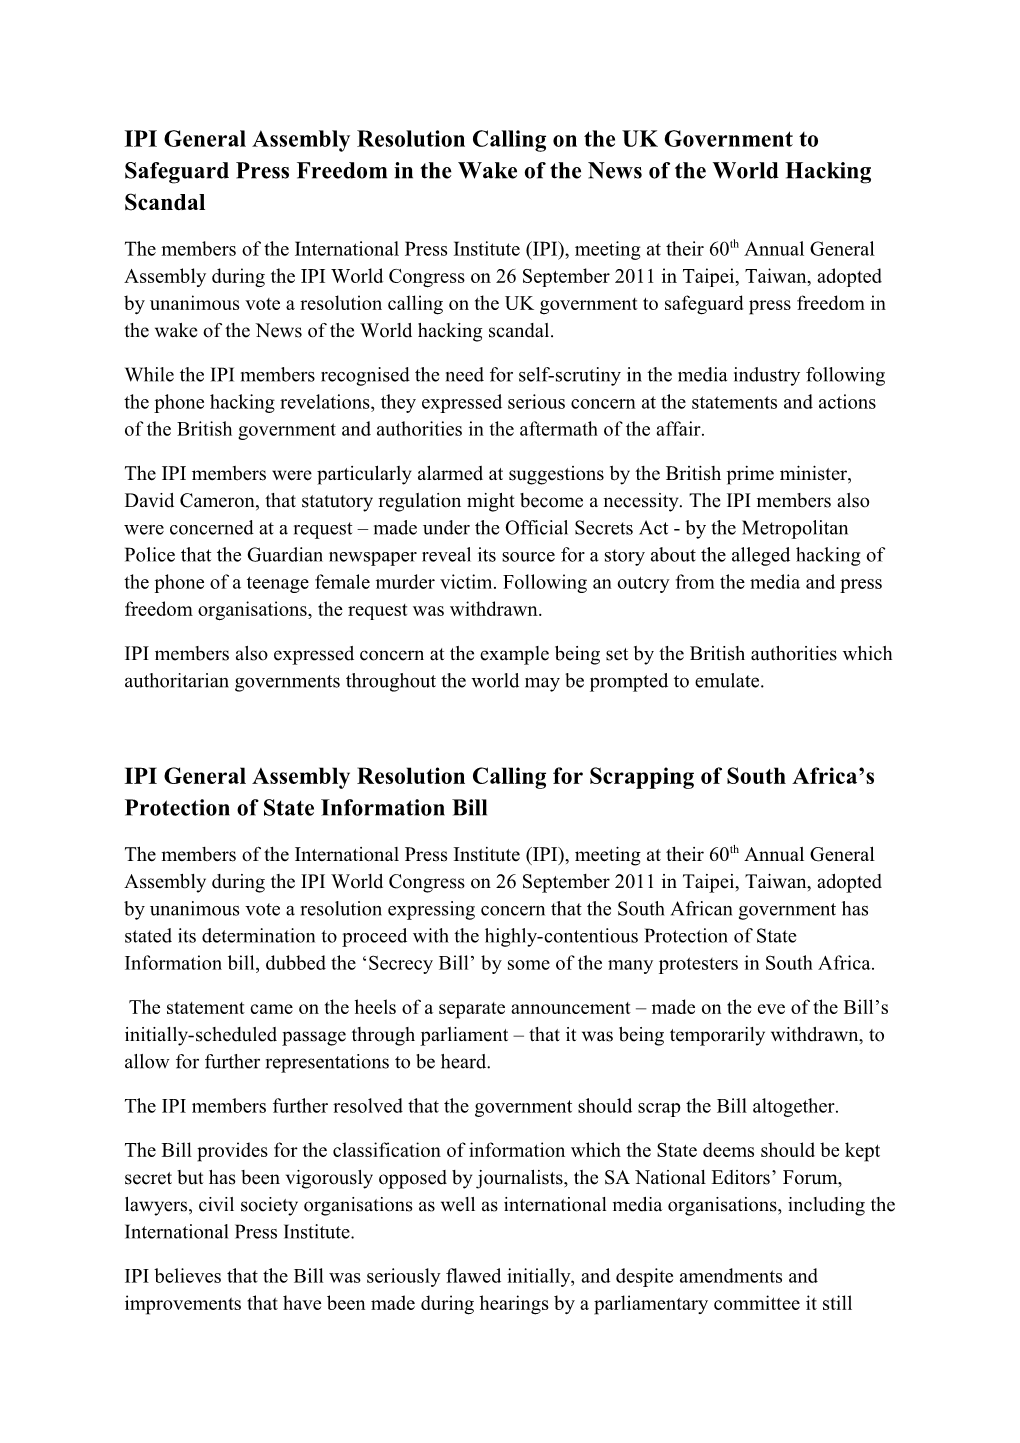 IPI General Assembly Resolution Calling on the UK Government to Safeguard Press Freedom